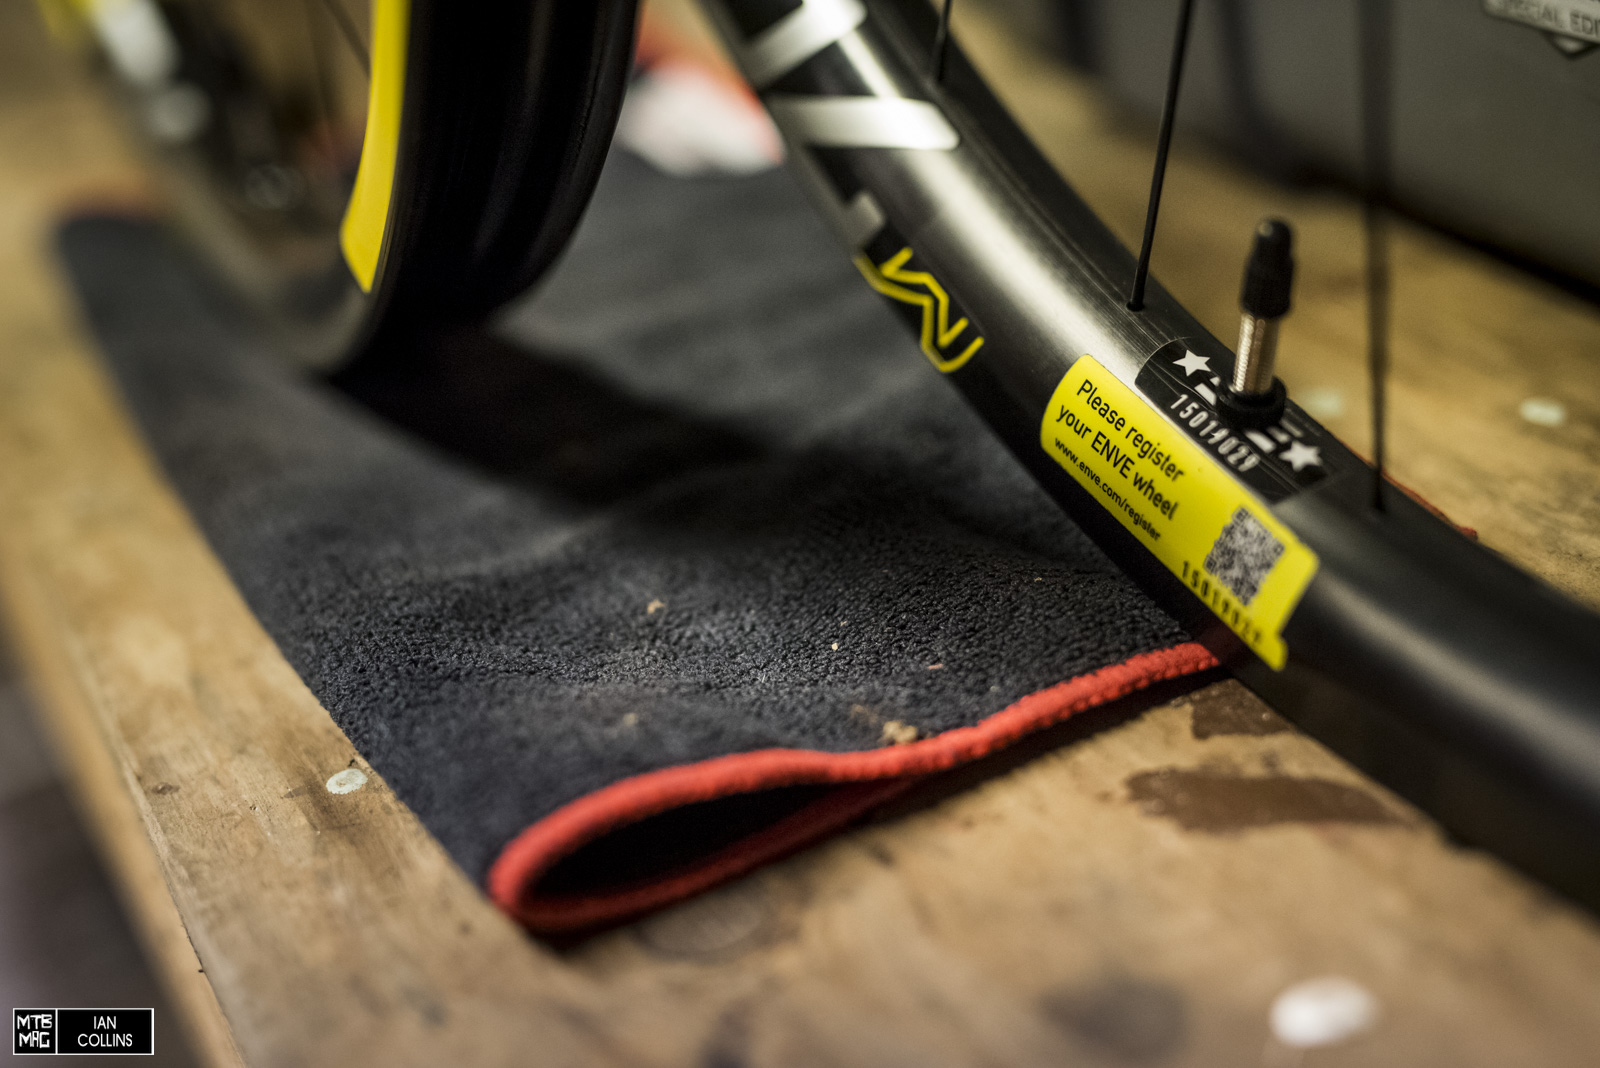 Tubeless valves are included and ENVE has a pretty cool way for their customers to register their products.